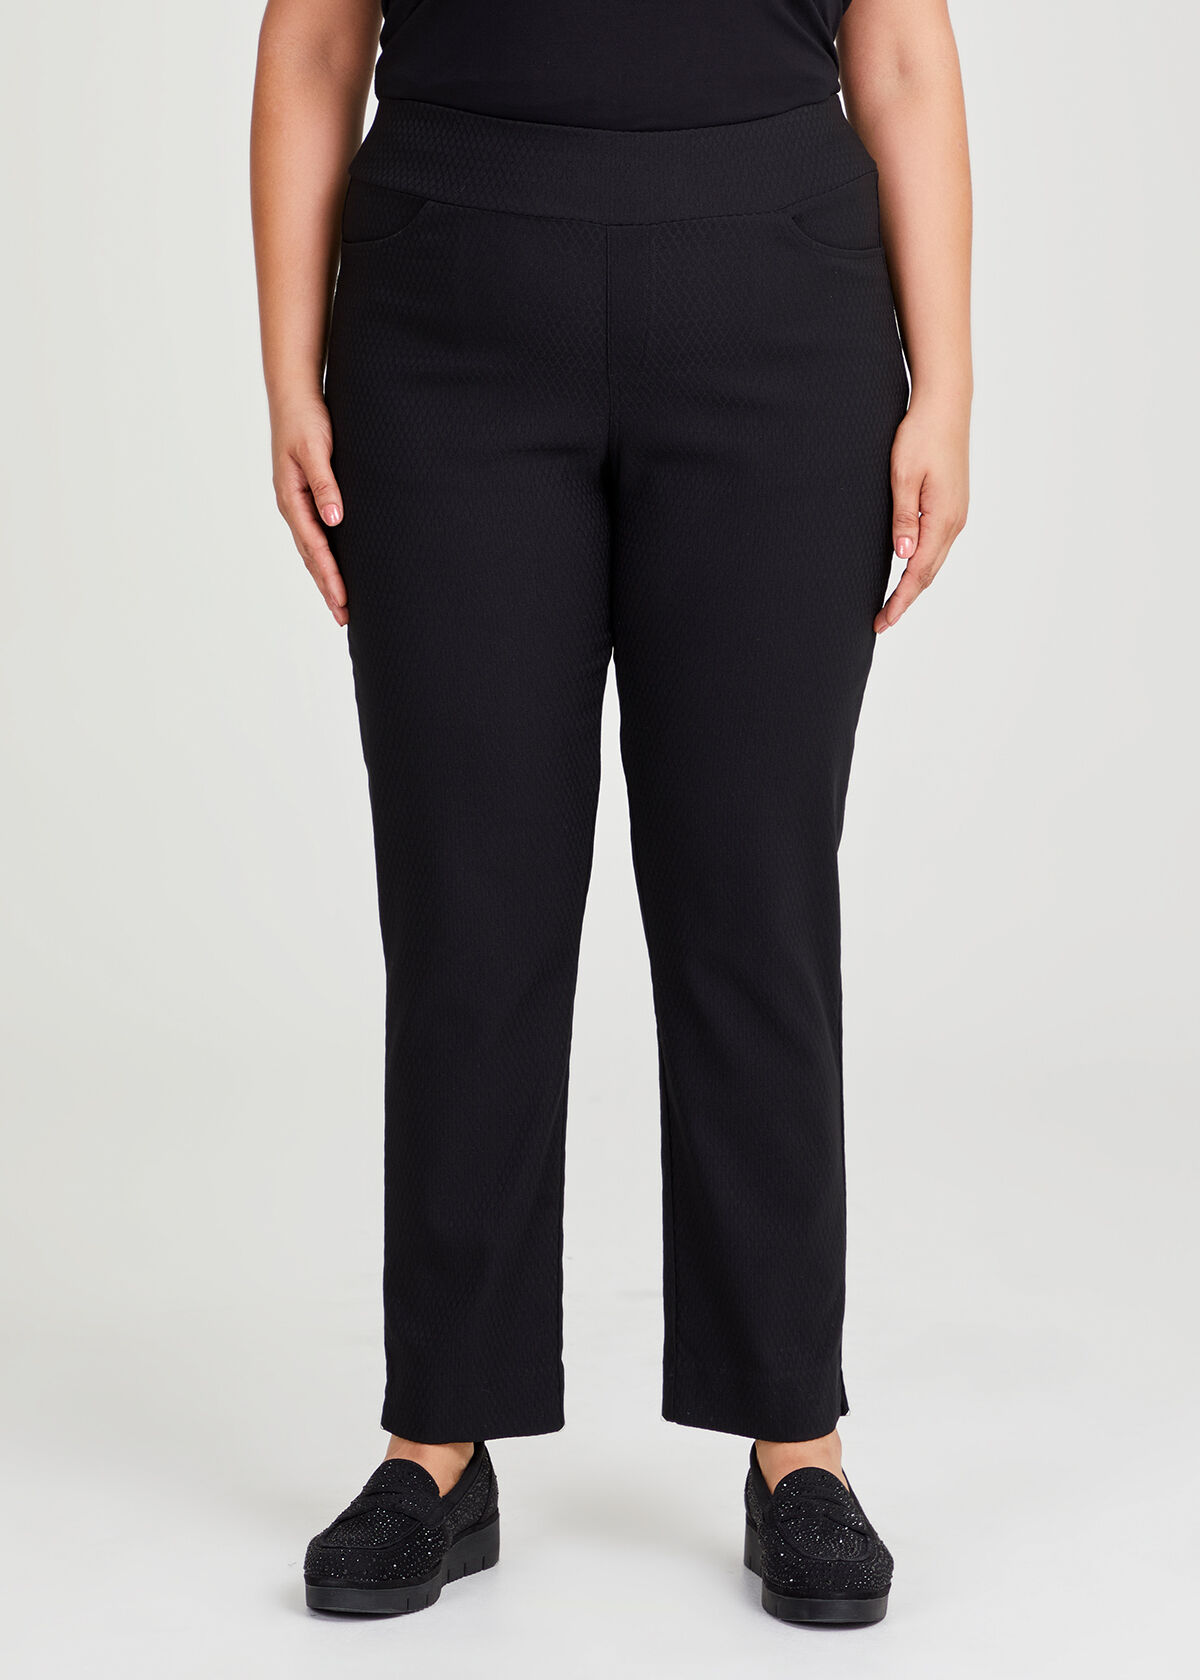 Plus Size Work Wear - Plus Size Professional Outfit #plussizeworkoutfit |  Stretch work pants, Work pants women, Professional outfits